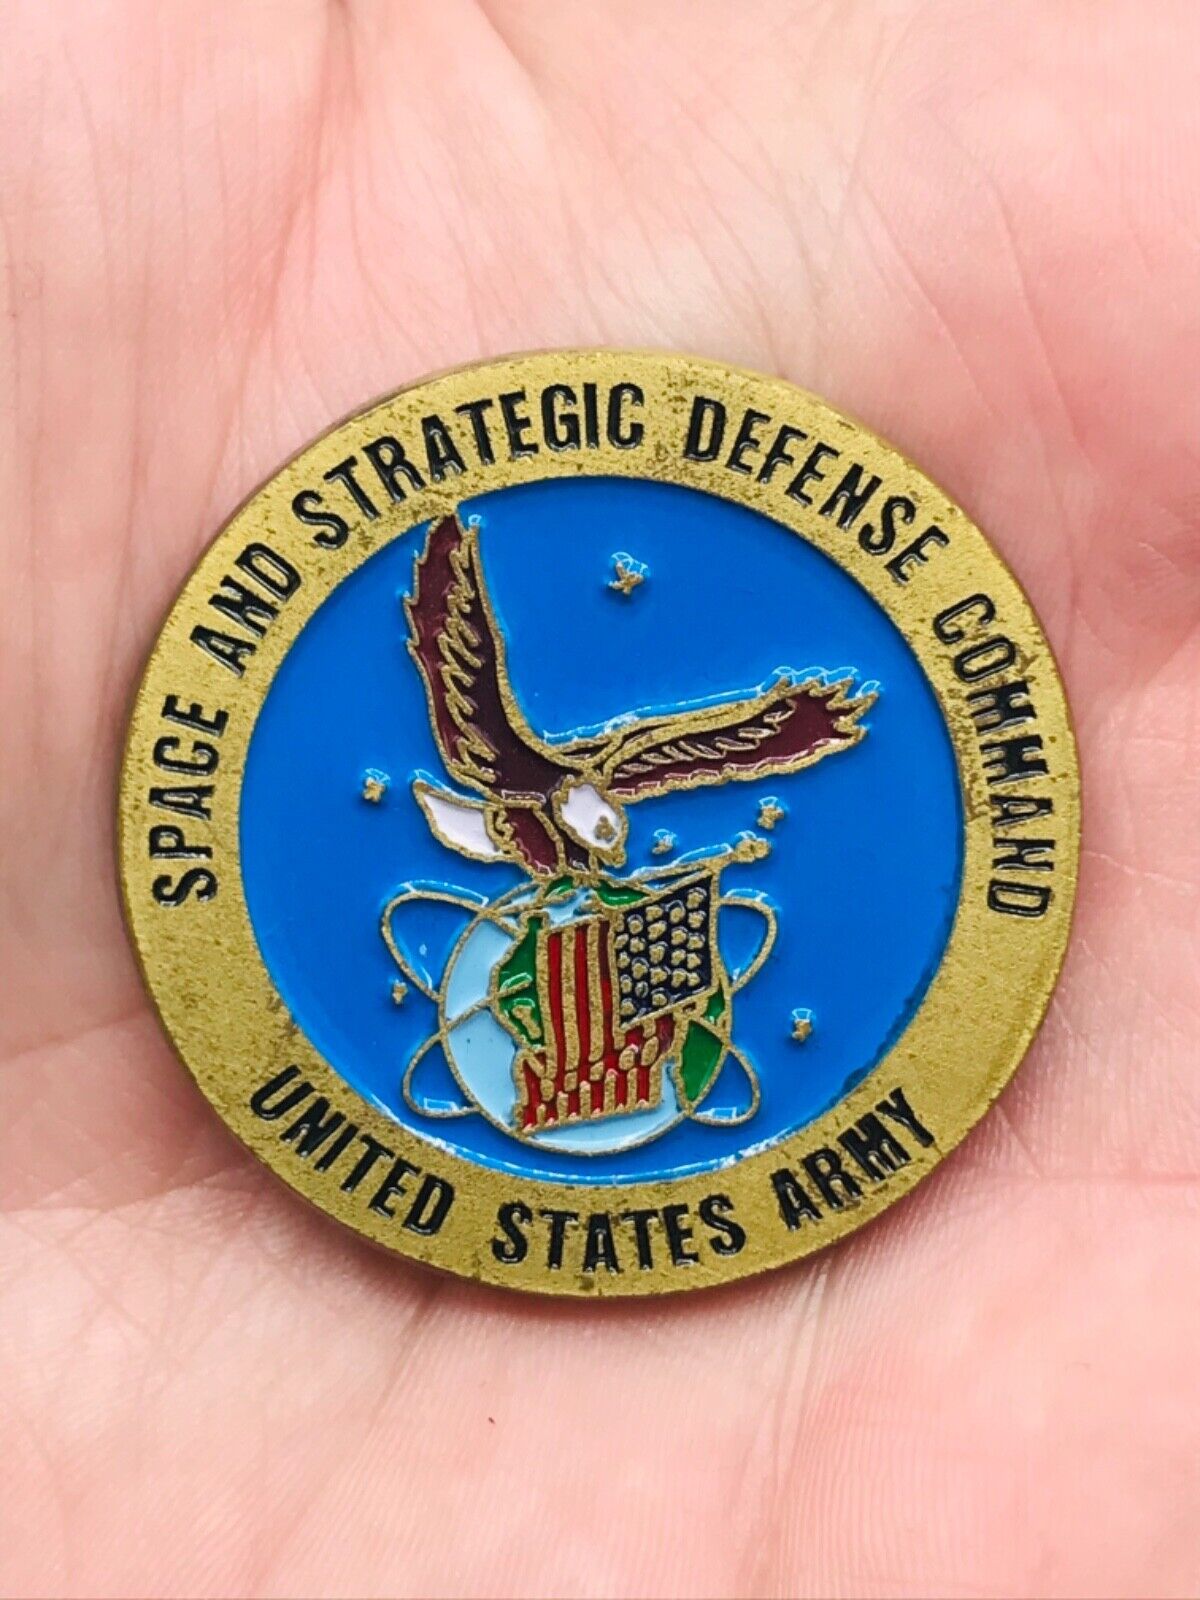 Space & Strategic Defense Command United States Army Challenge Coin 